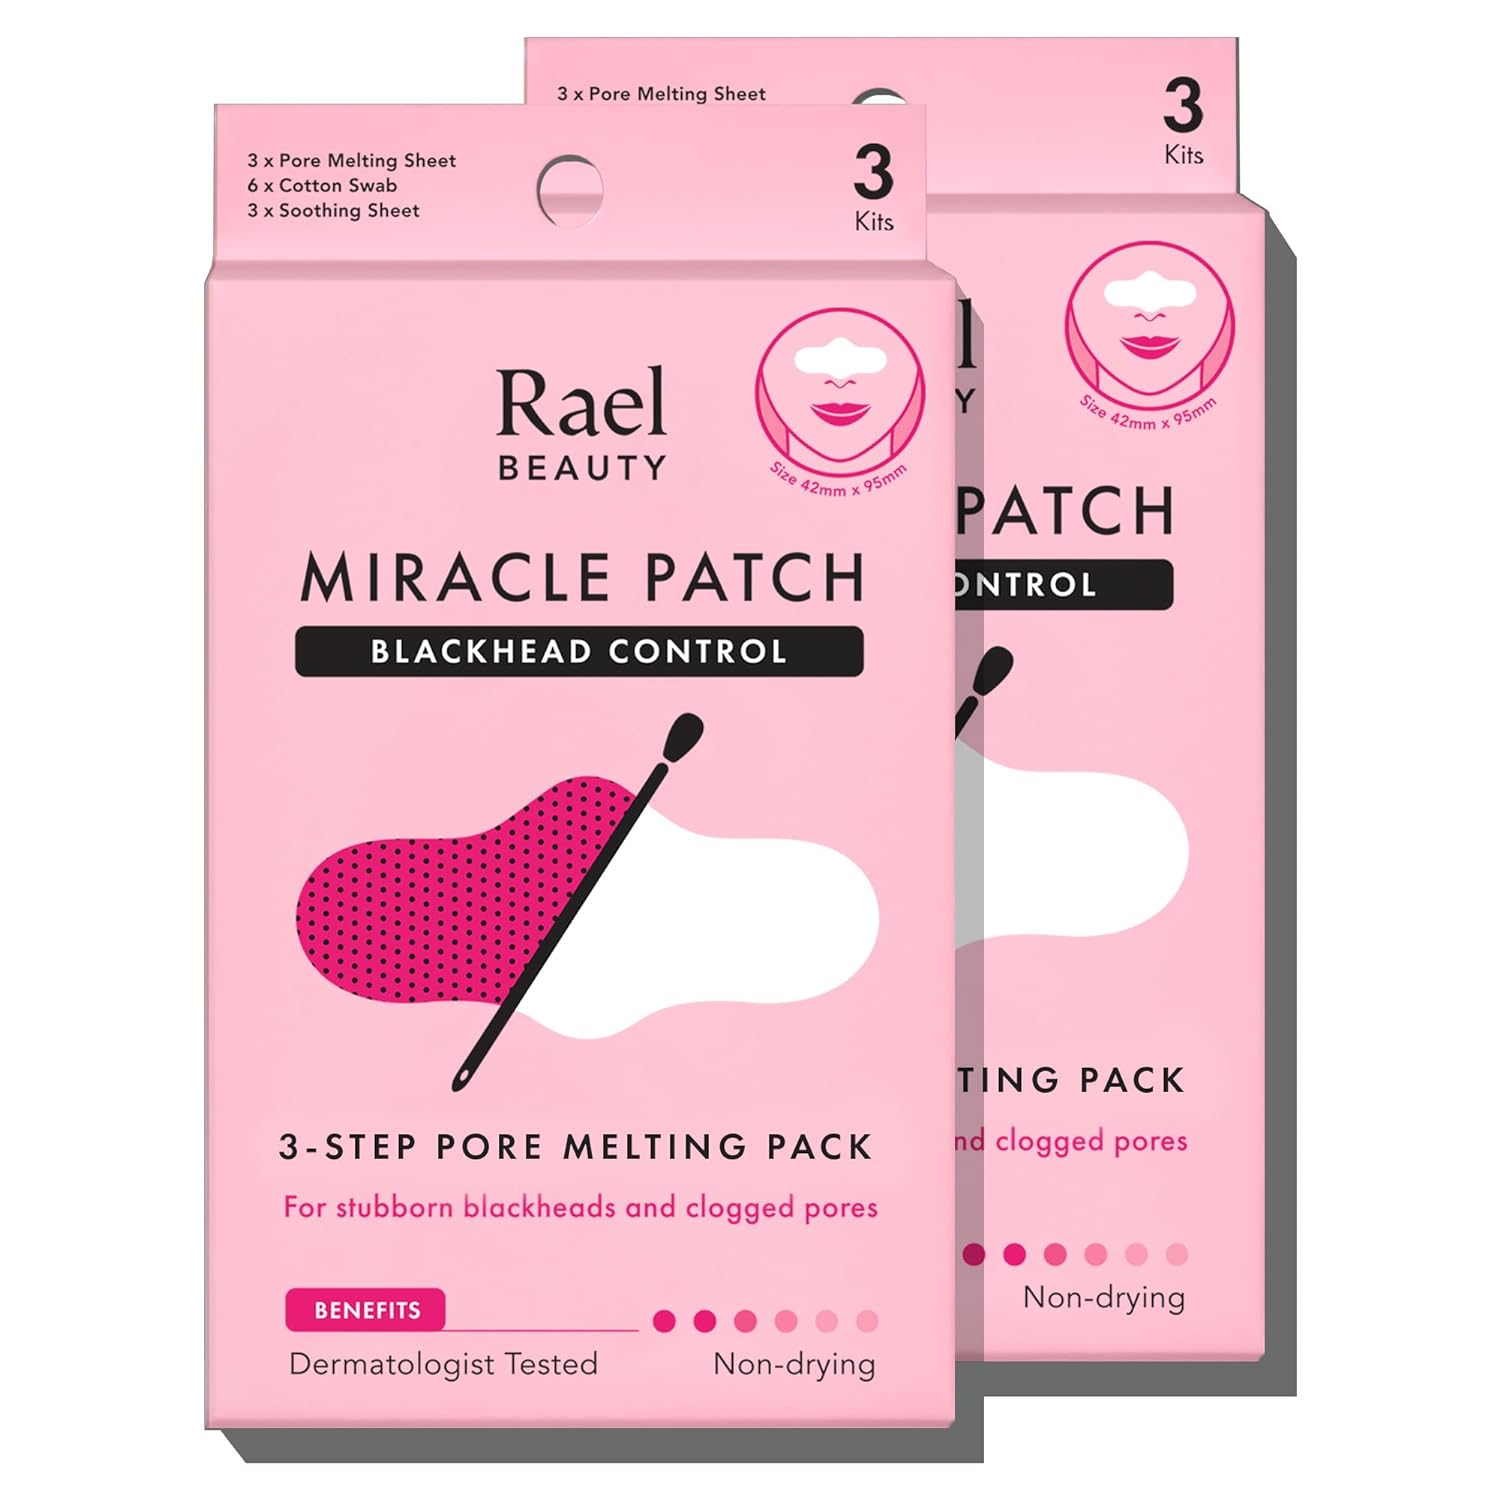 Rael Blackhead Remover, Miracle Patch Melting Pack - Nose Strips for Blackheads, Pore Melting and Soothing Sheets, 3 Step Kit, Sebum Removing Cotton Swabs, Dermatologist Tested (2 Pack)